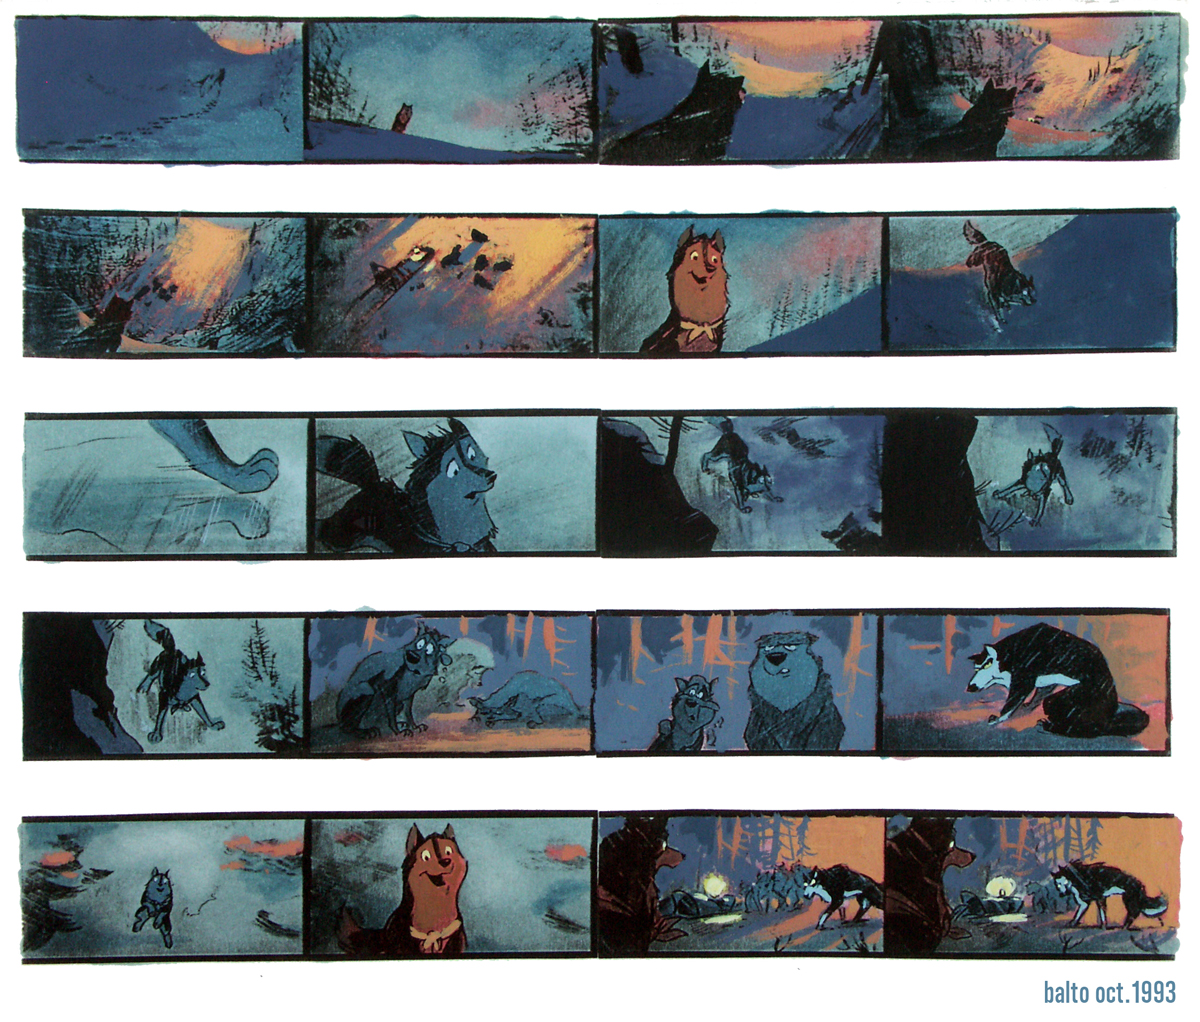 Color script from the animation called Balto.© universal/AMBLIN